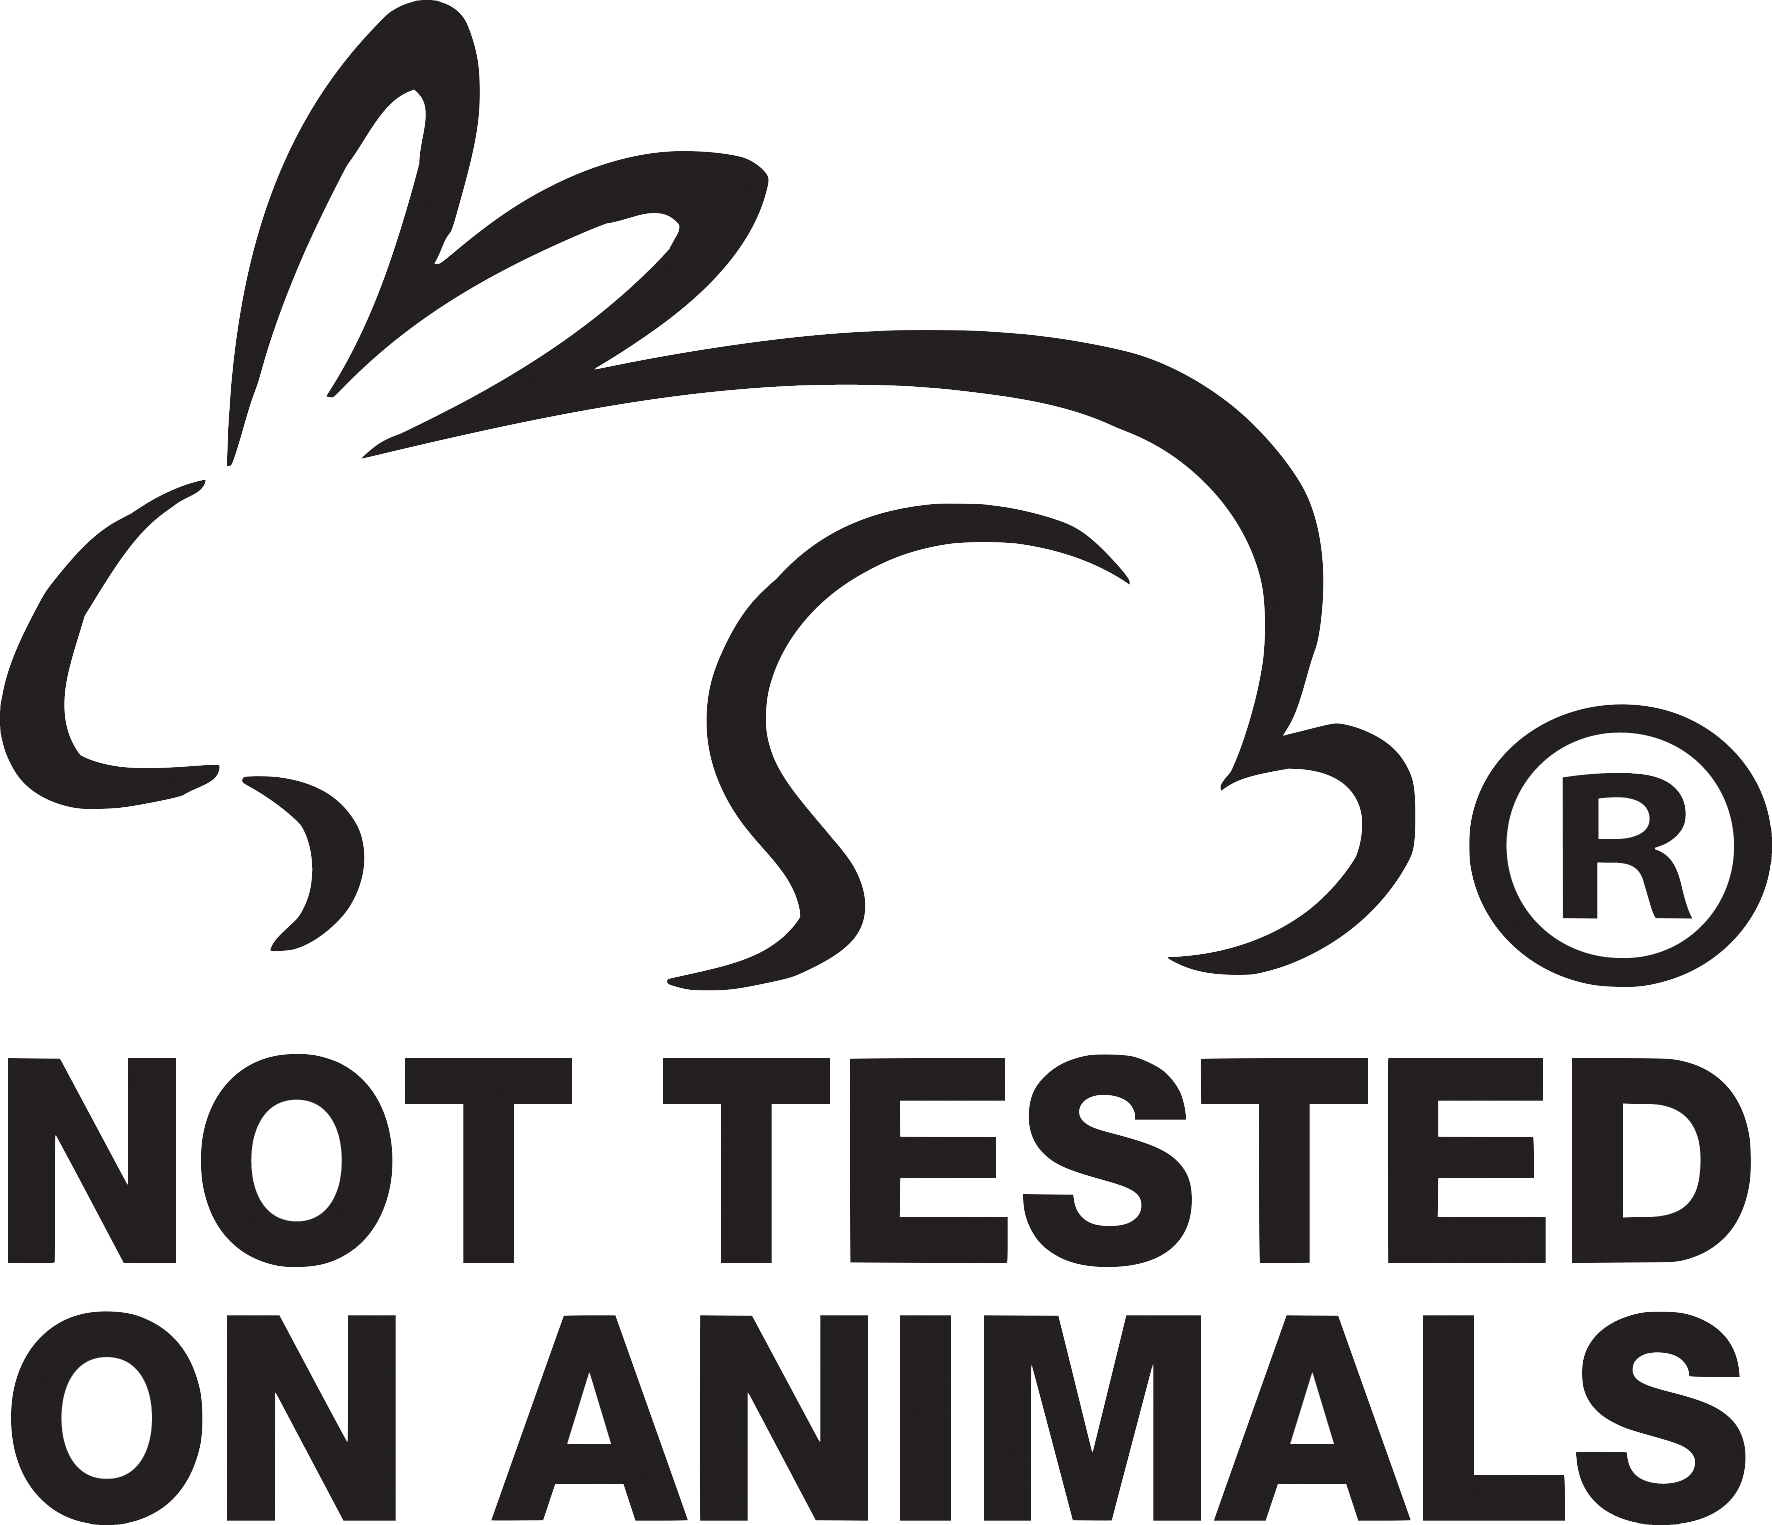 Choose Cruelty-Free Logo of a rabbit and the words “Not Tested on Animals” underneath the rabbit.
